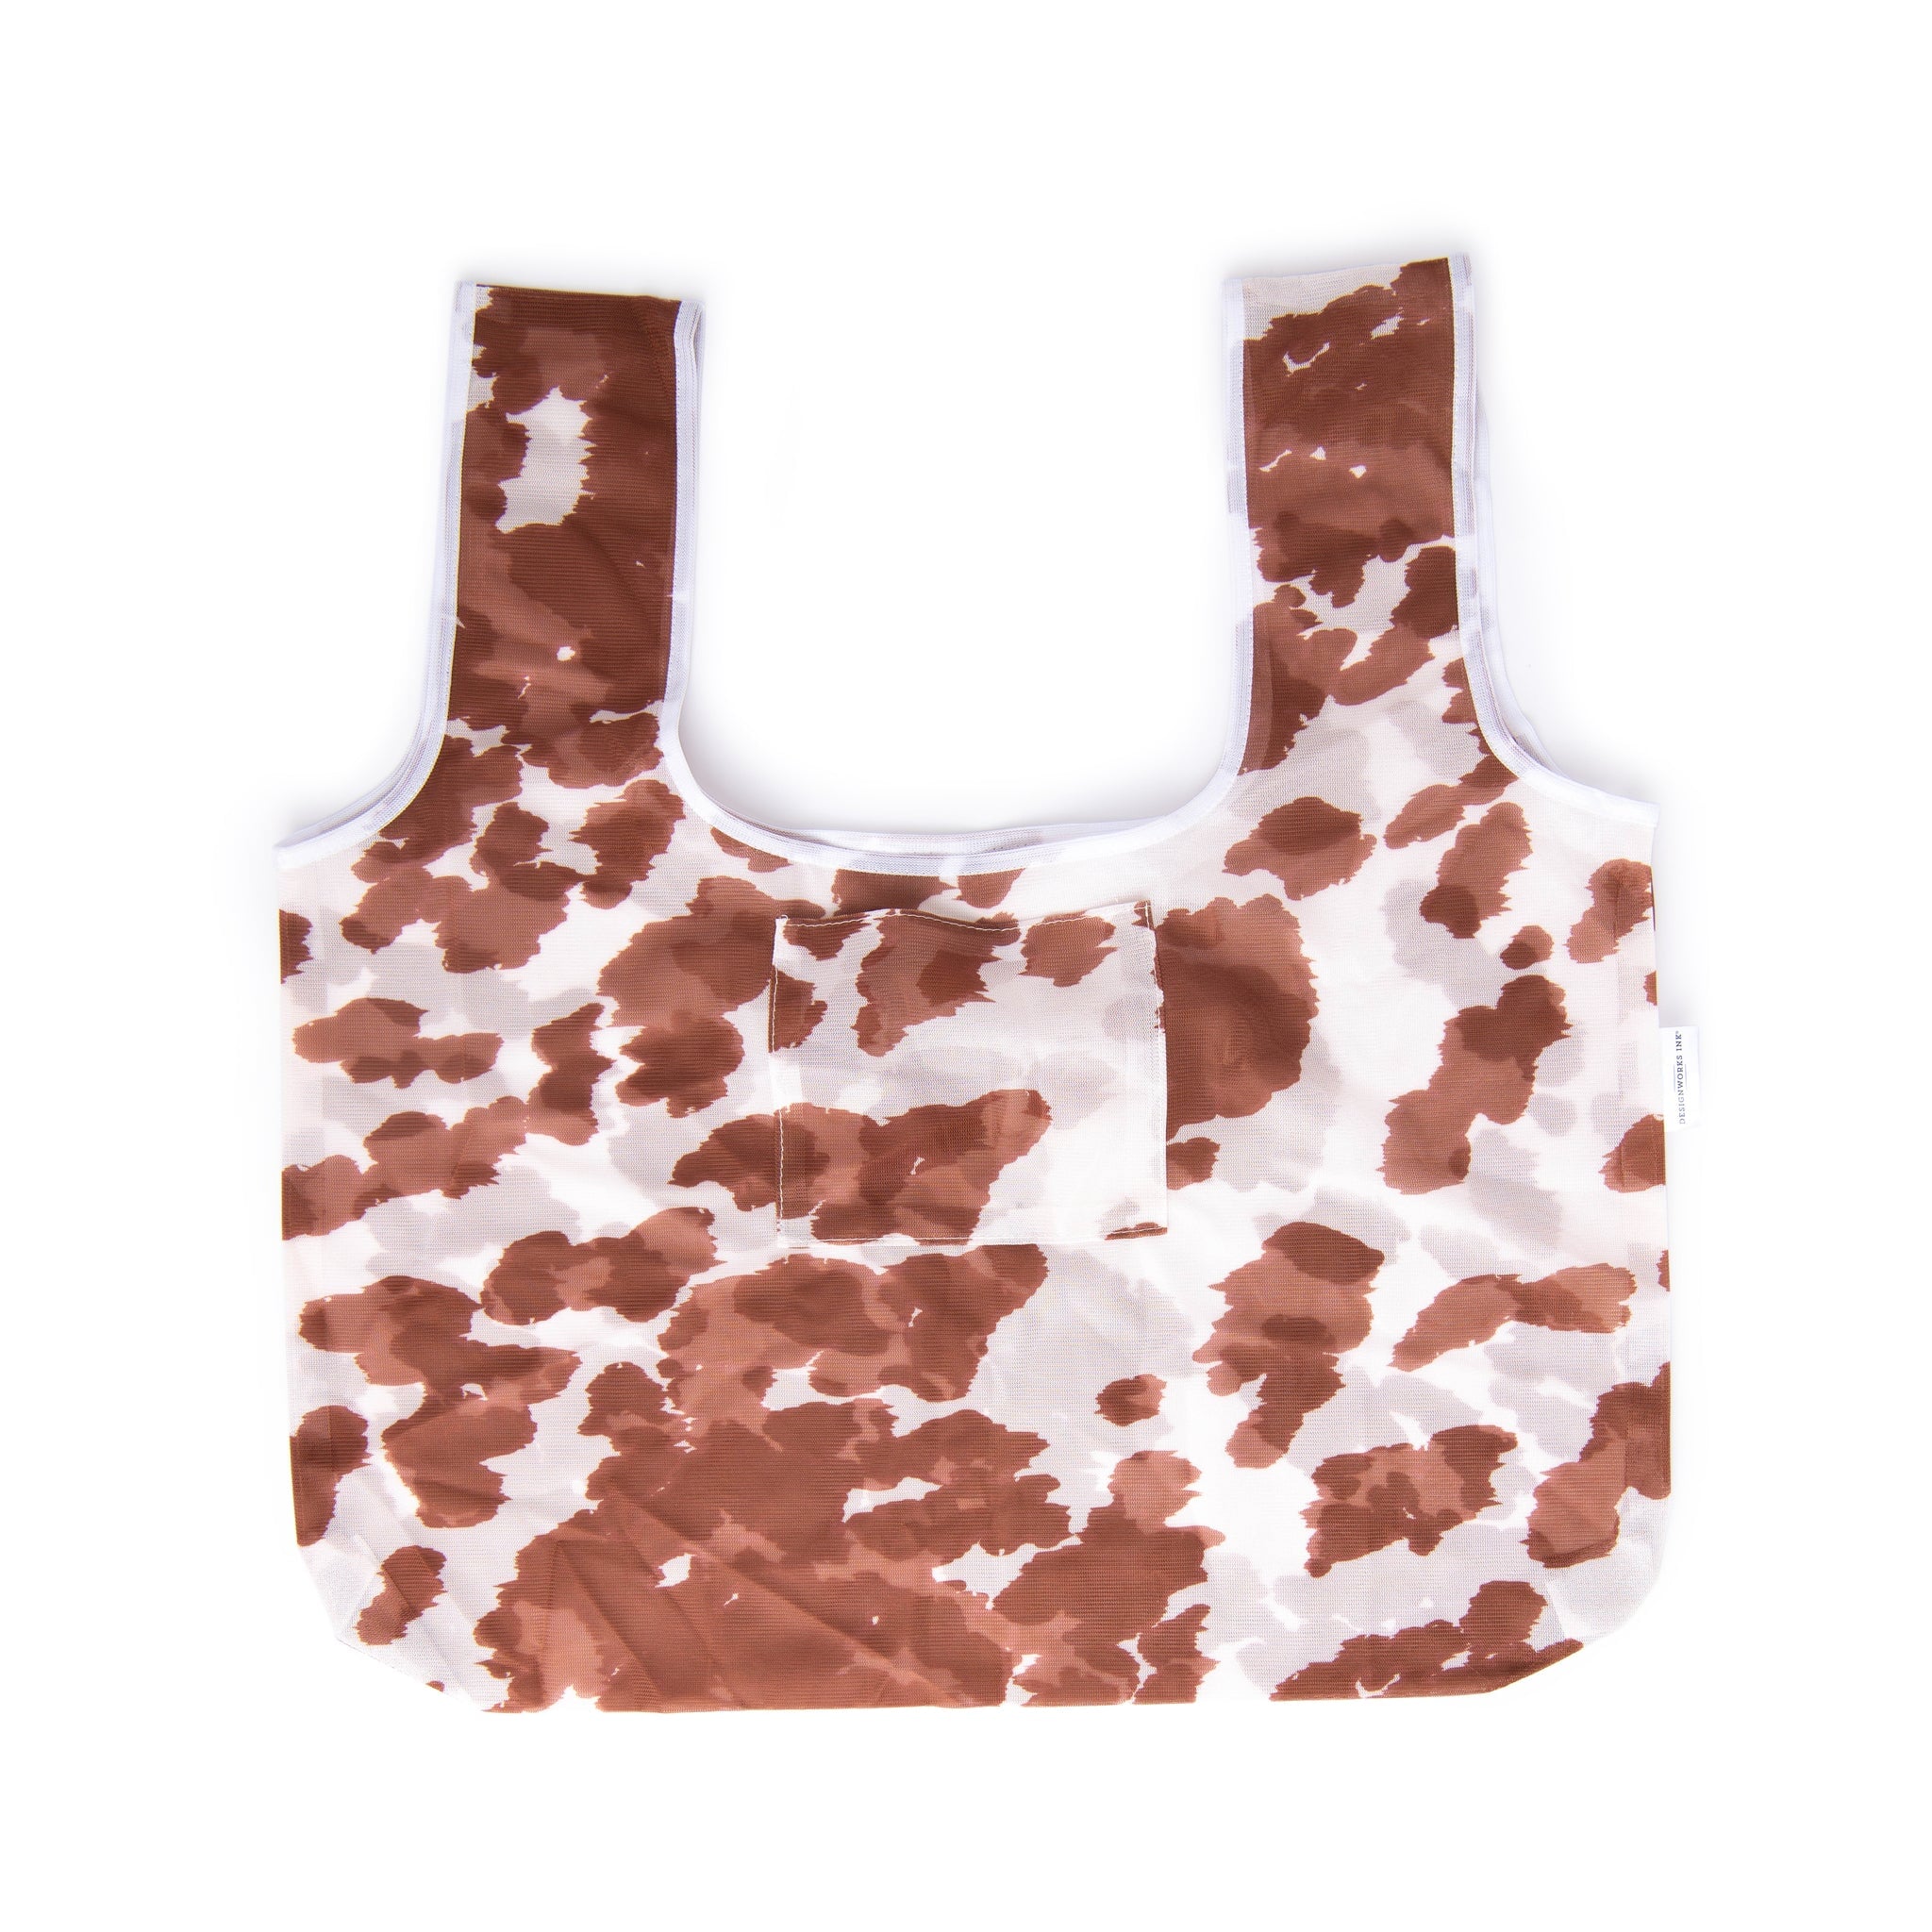 On a white background is a brown and white cow printed nylon tote bag. 